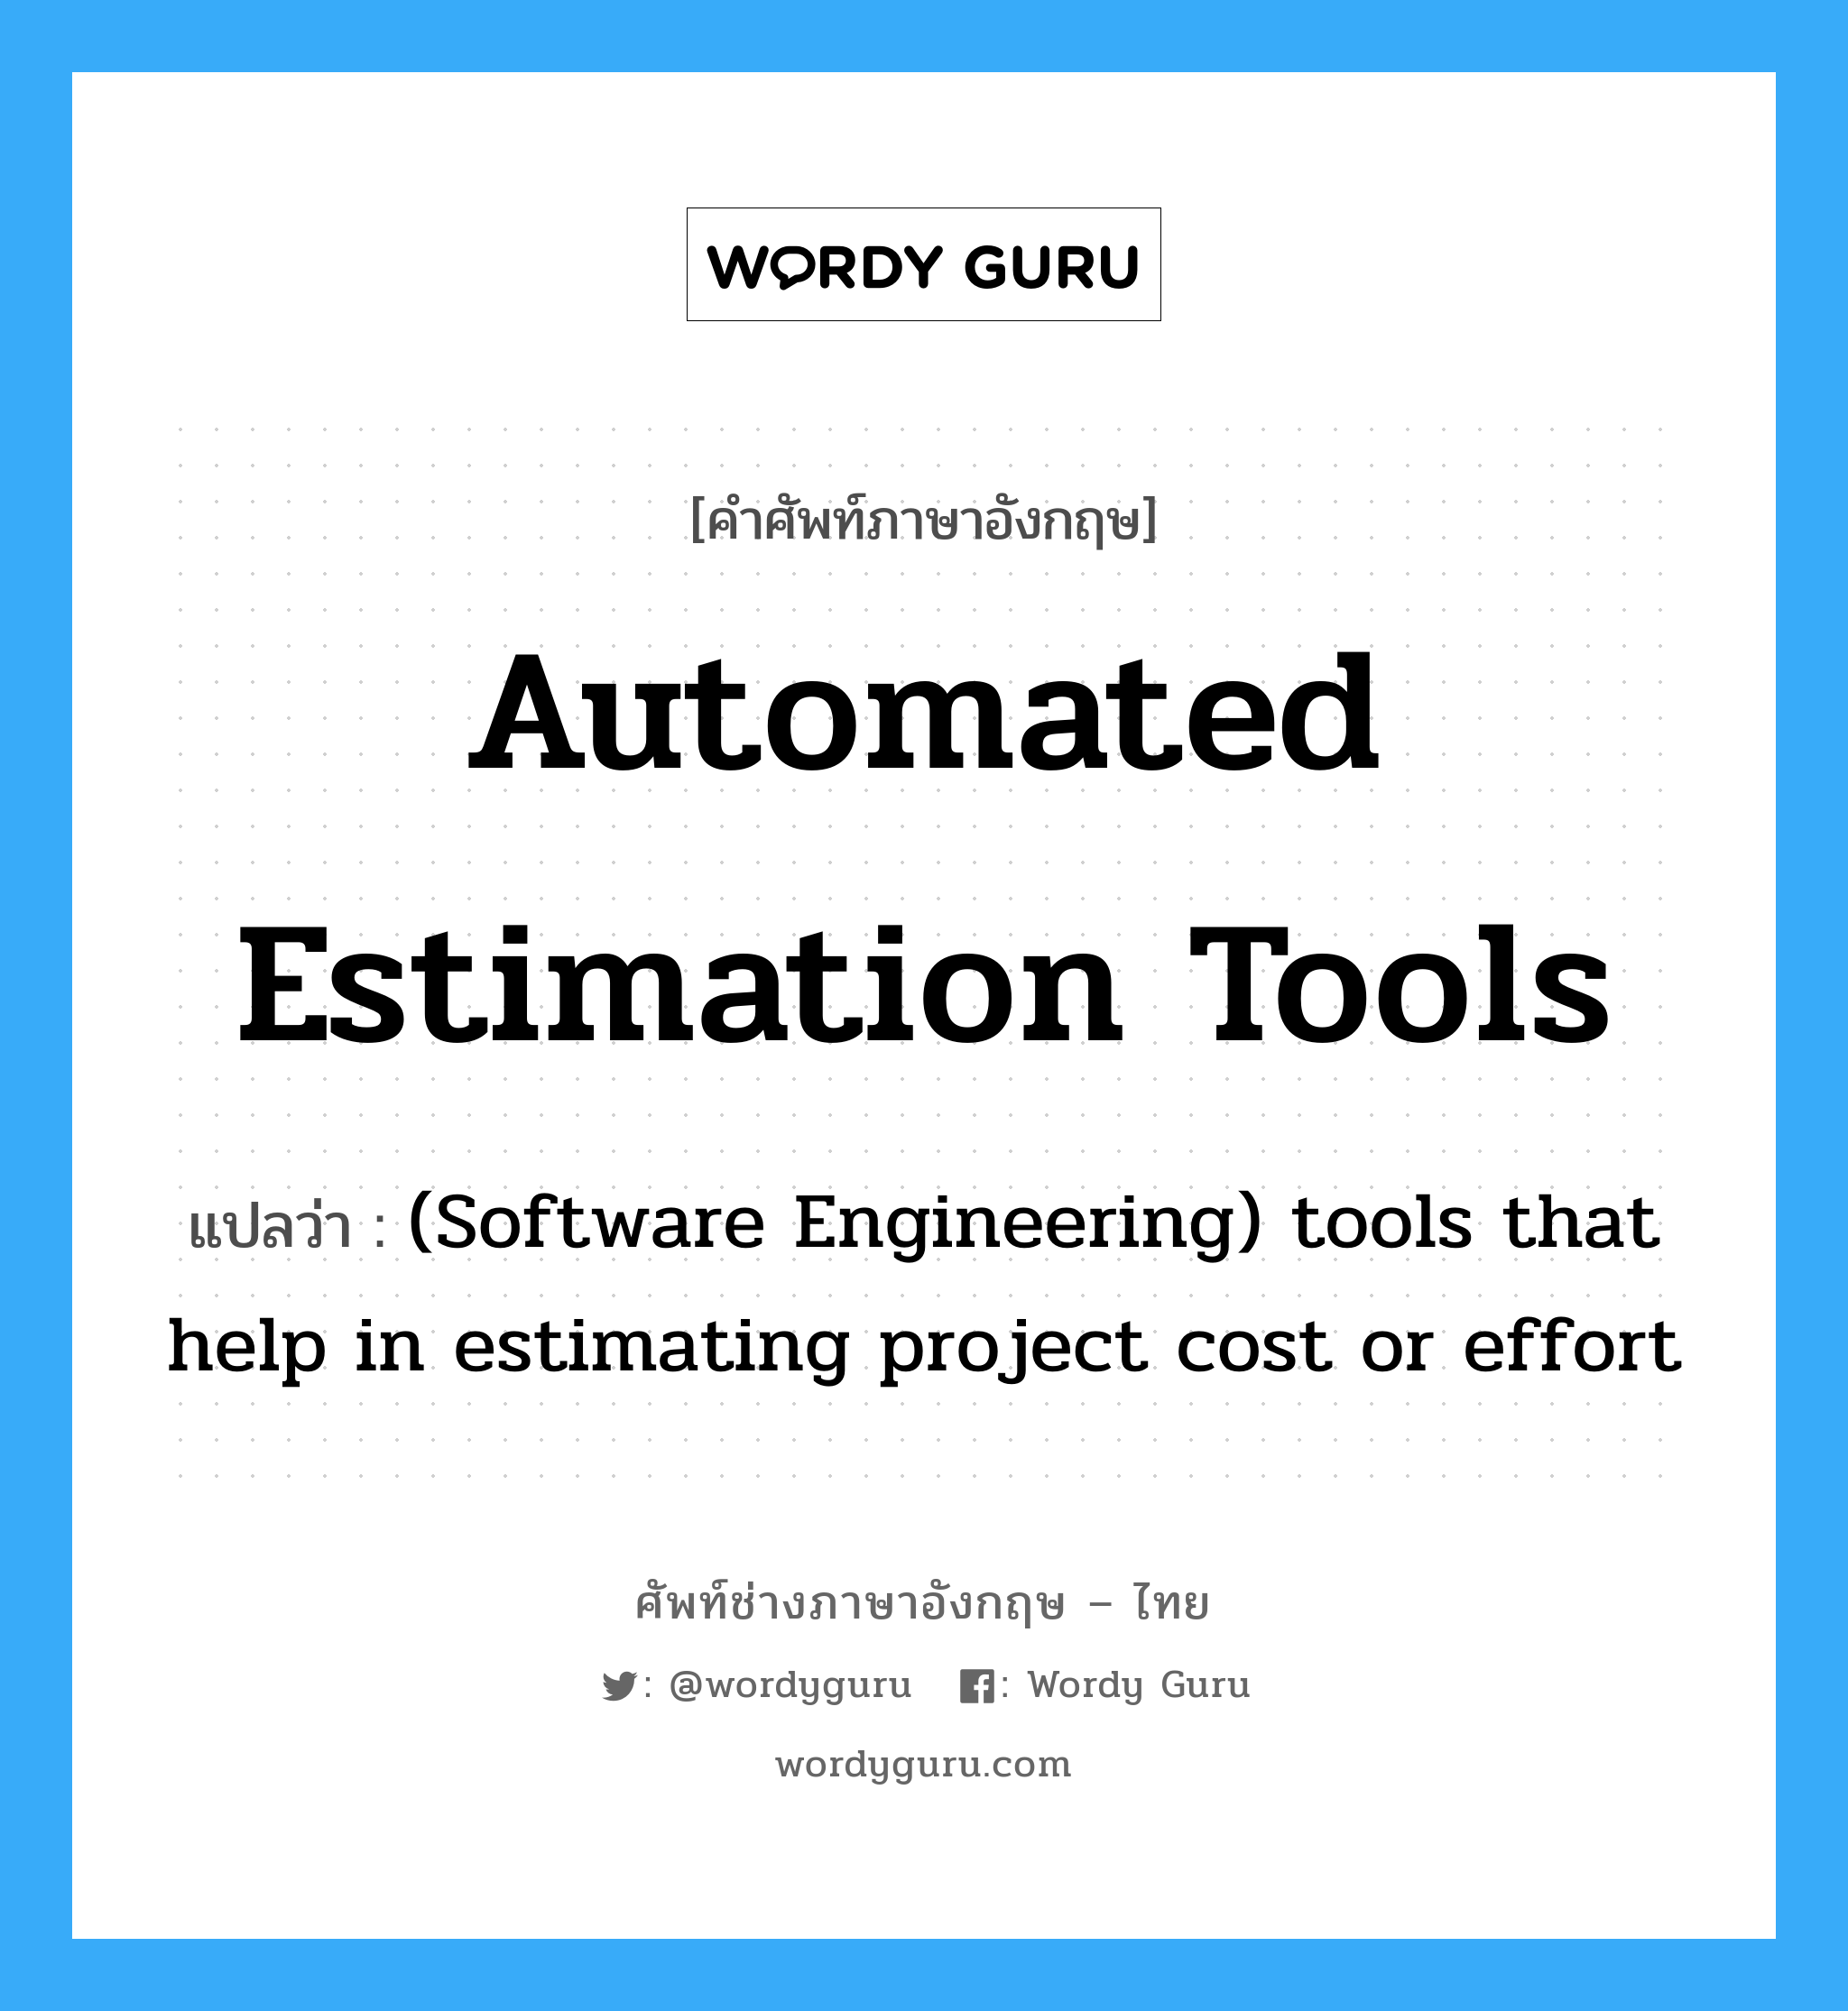 Automated estimation tools แปลว่า?, คำศัพท์ช่างภาษาอังกฤษ - ไทย Automated estimation tools คำศัพท์ภาษาอังกฤษ Automated estimation tools แปลว่า (Software Engineering) tools that help in estimating project cost or effort